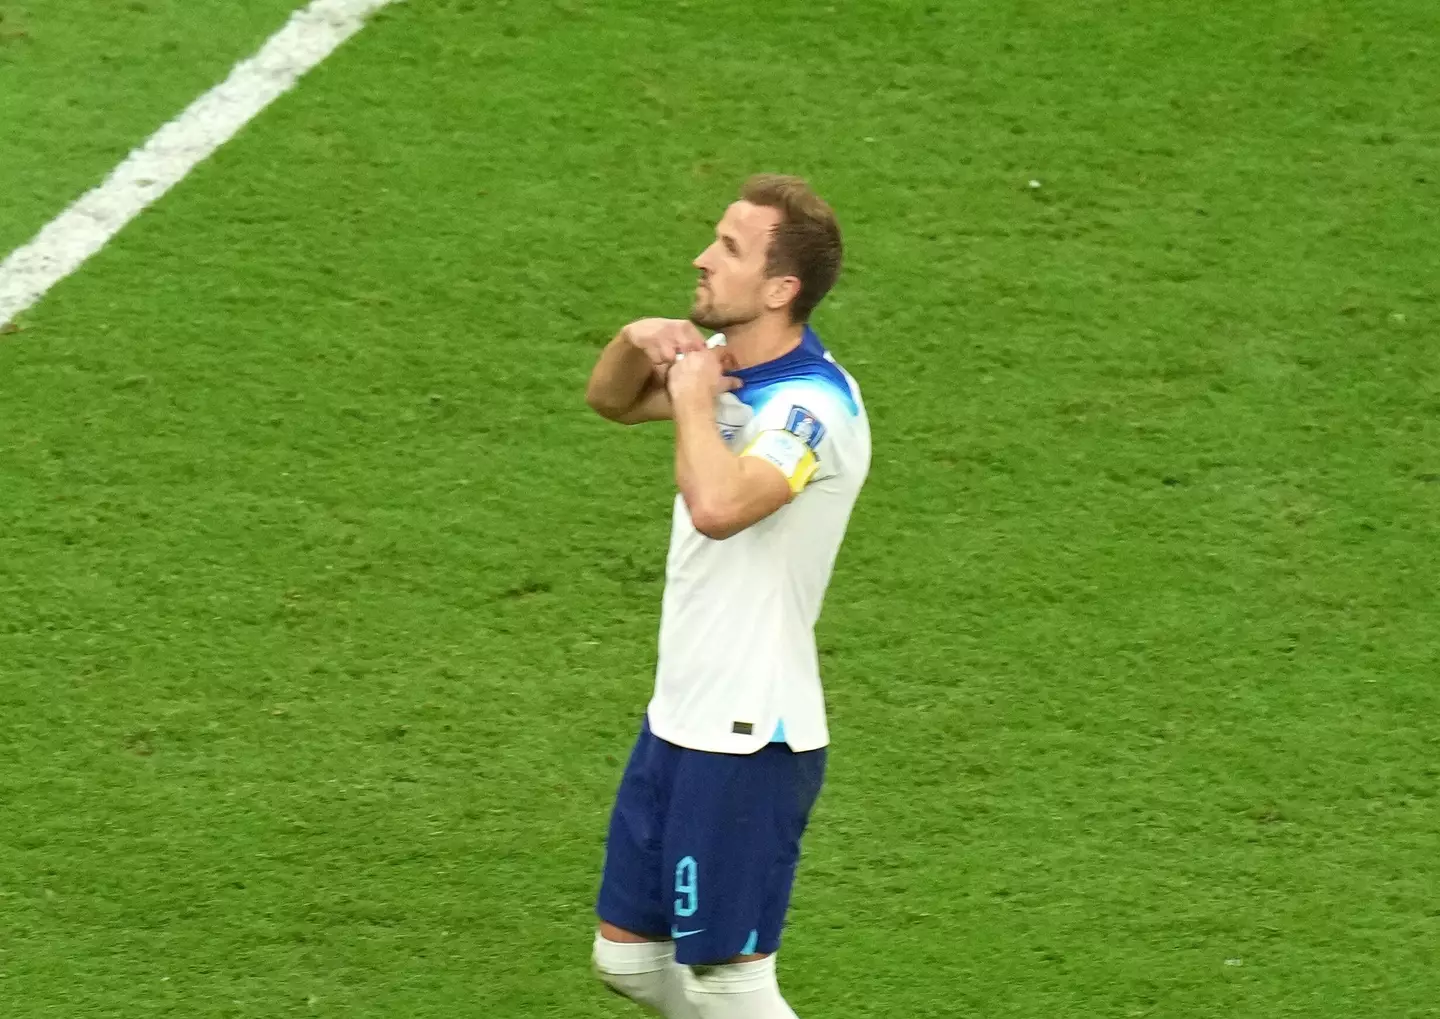 Harry Kane missed a penalty with less than 10 minutes to go in the match.